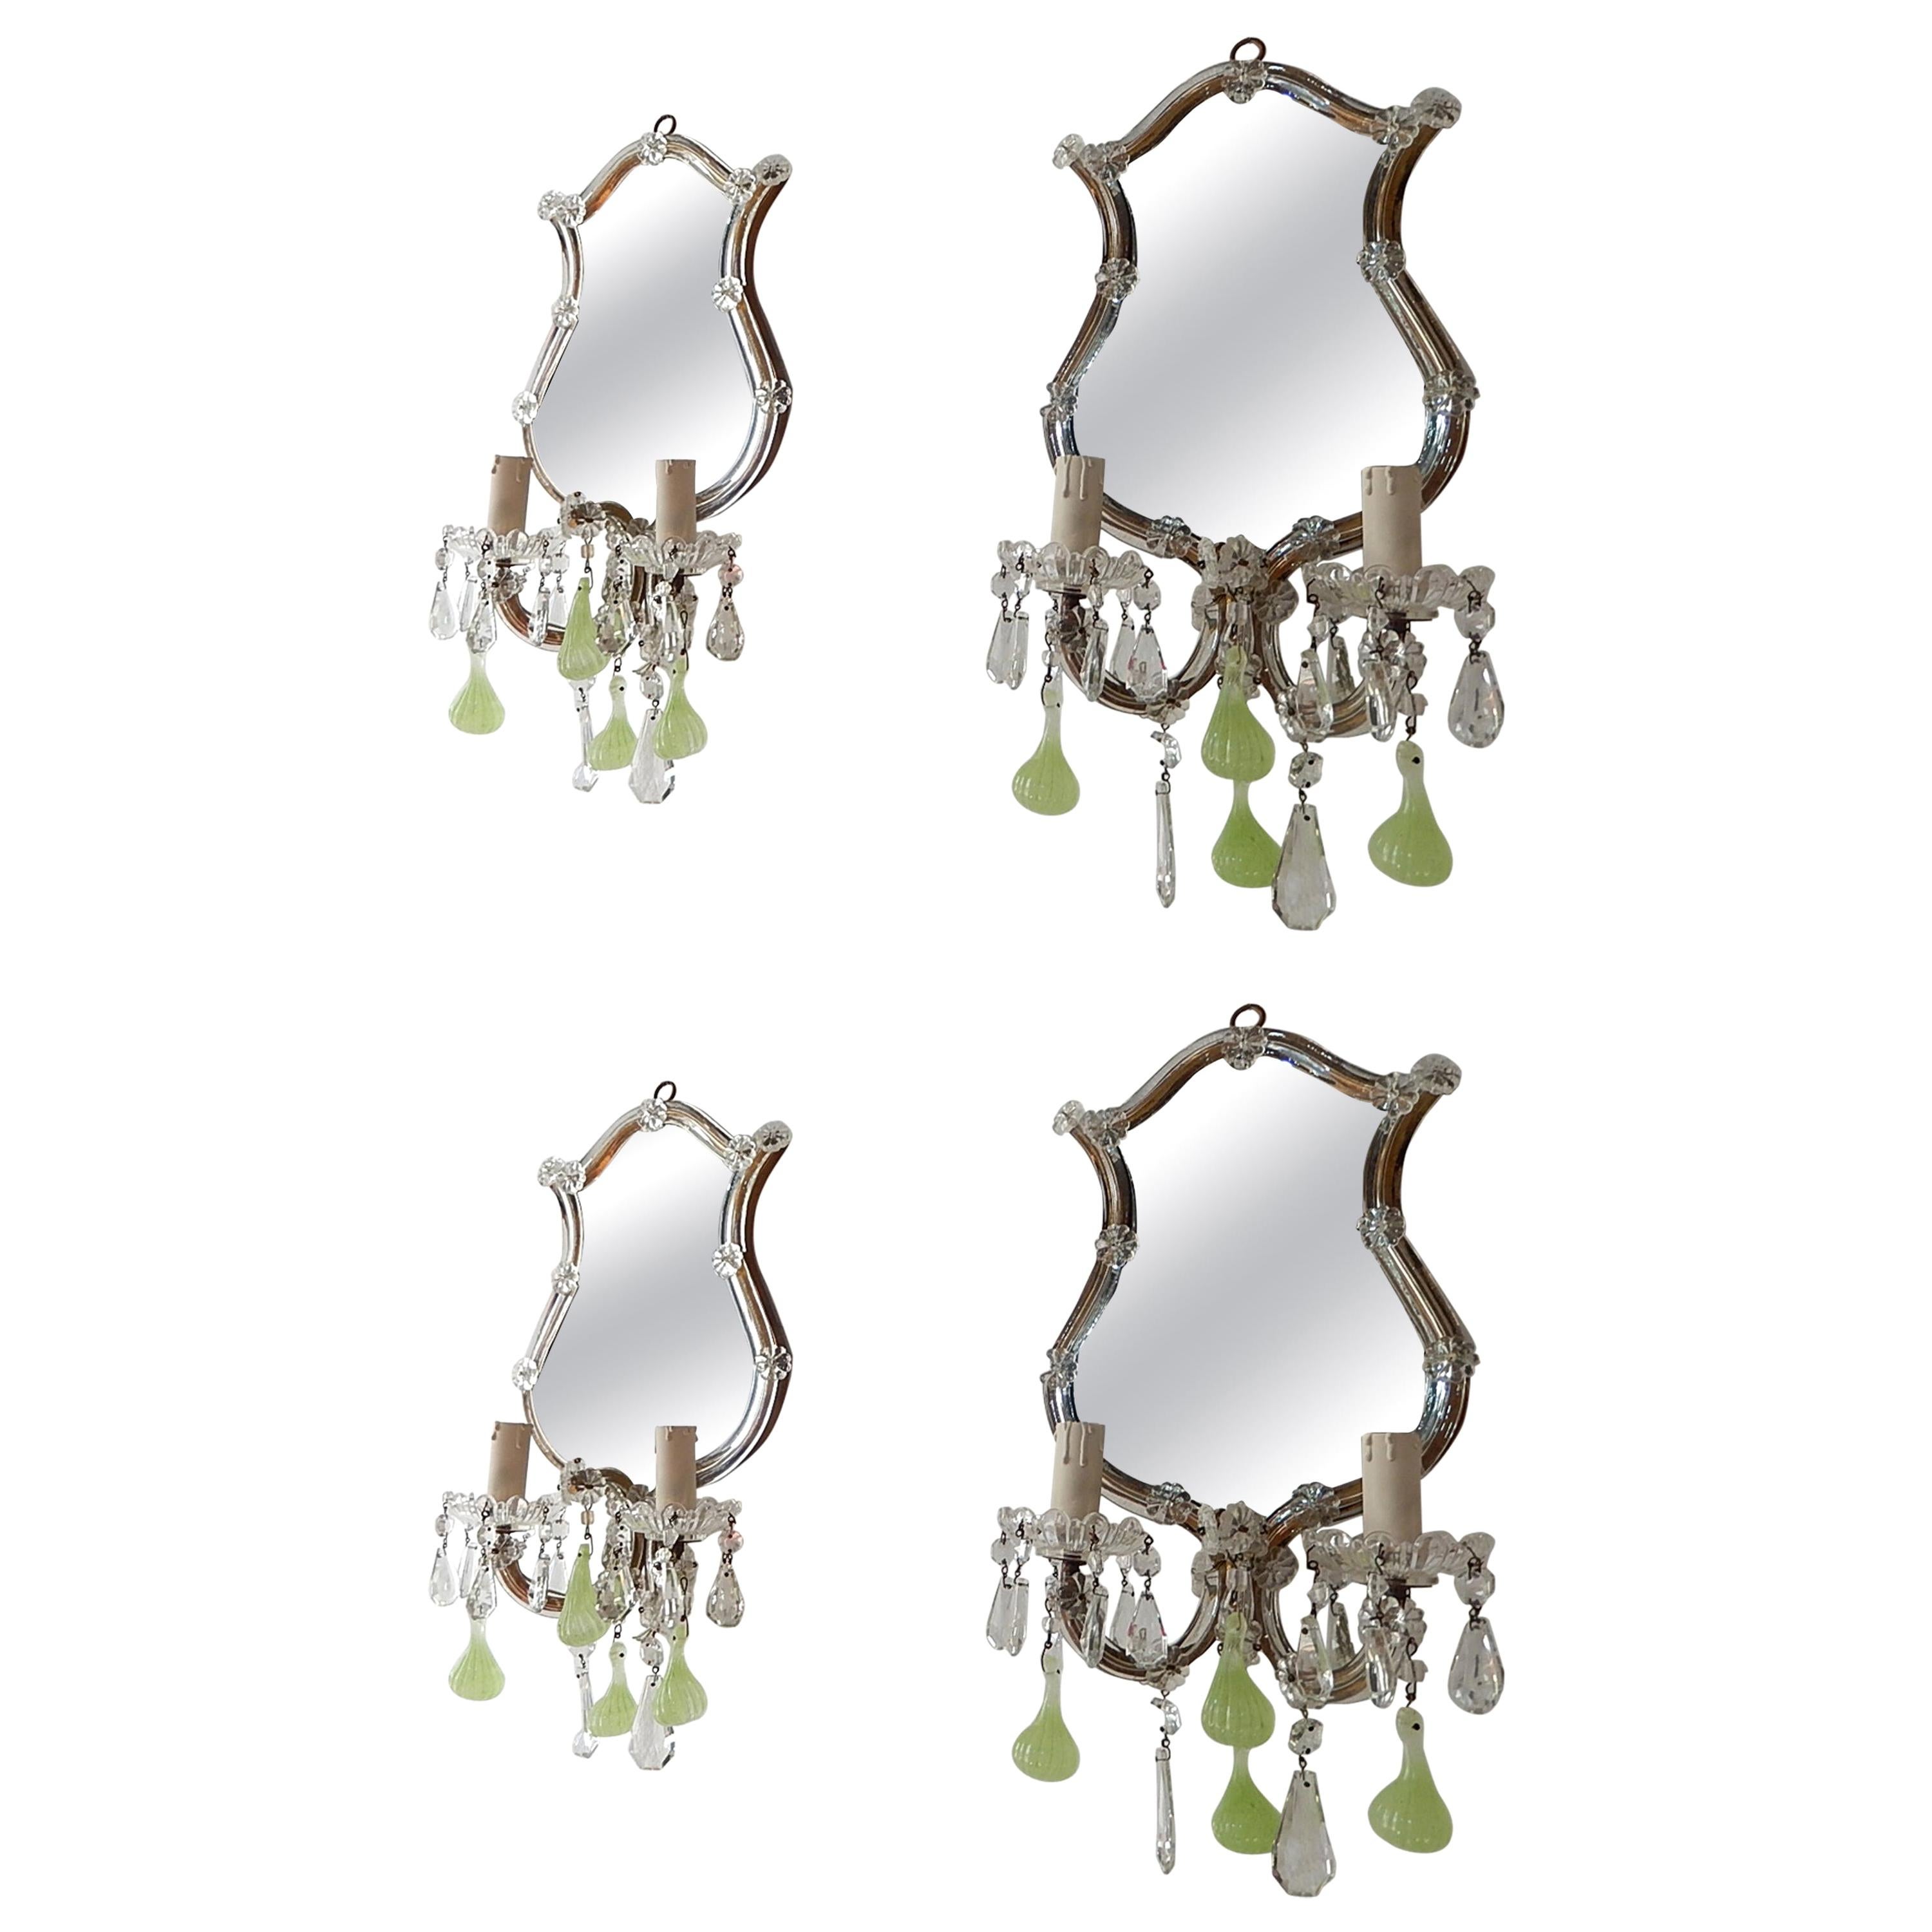 1920 Chartreuse Murano Glass Figs Mirror Sconces, Set of Four